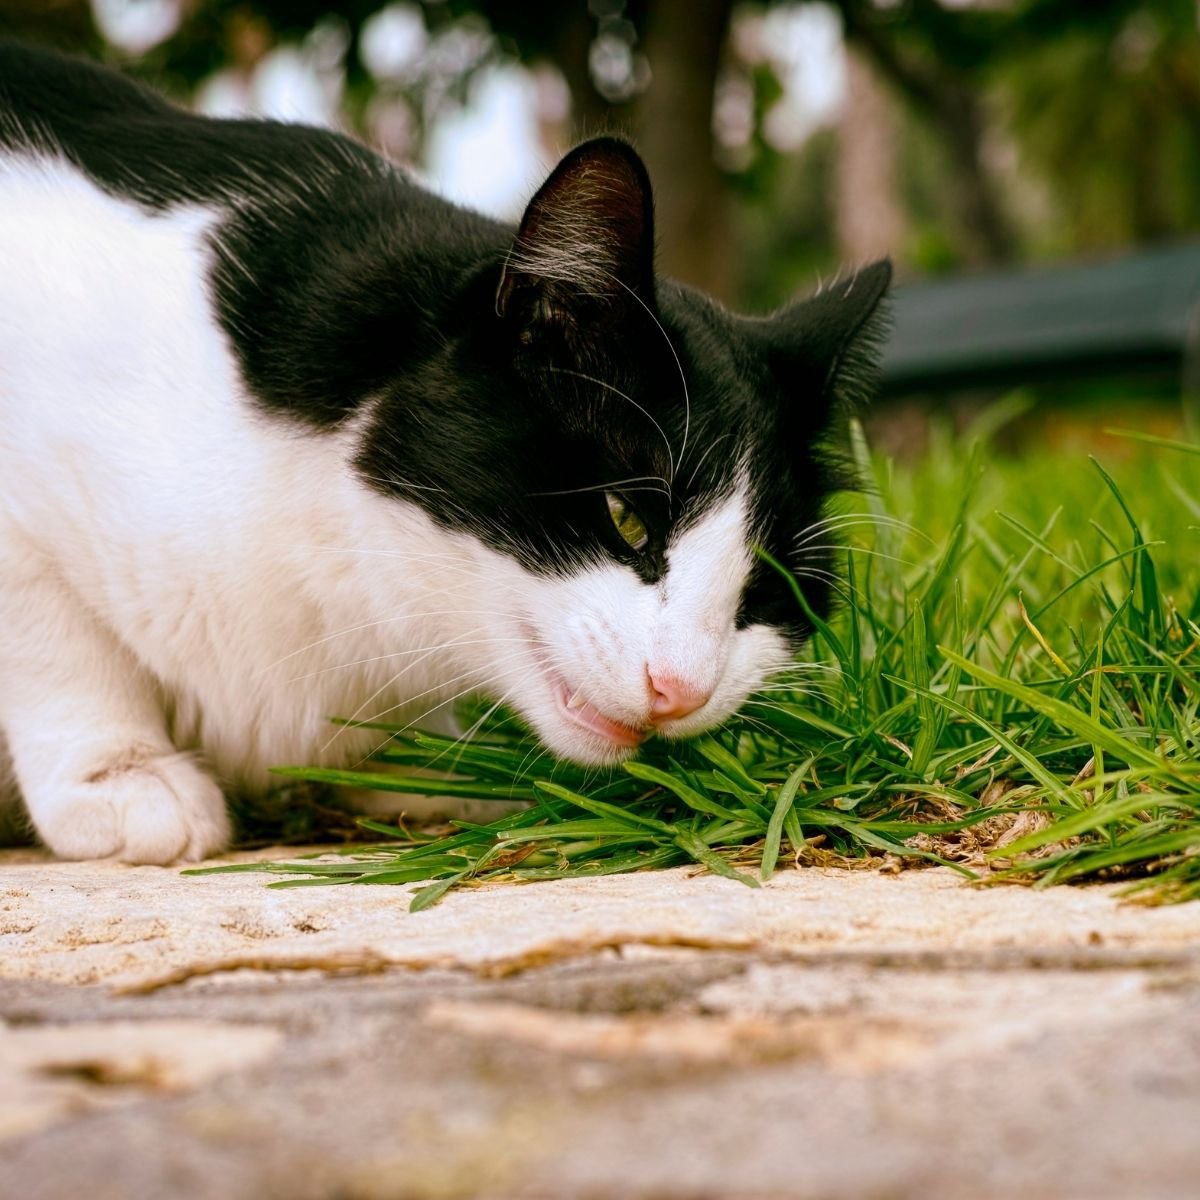 Why Do Cats Eat Grass And Is It Bad?